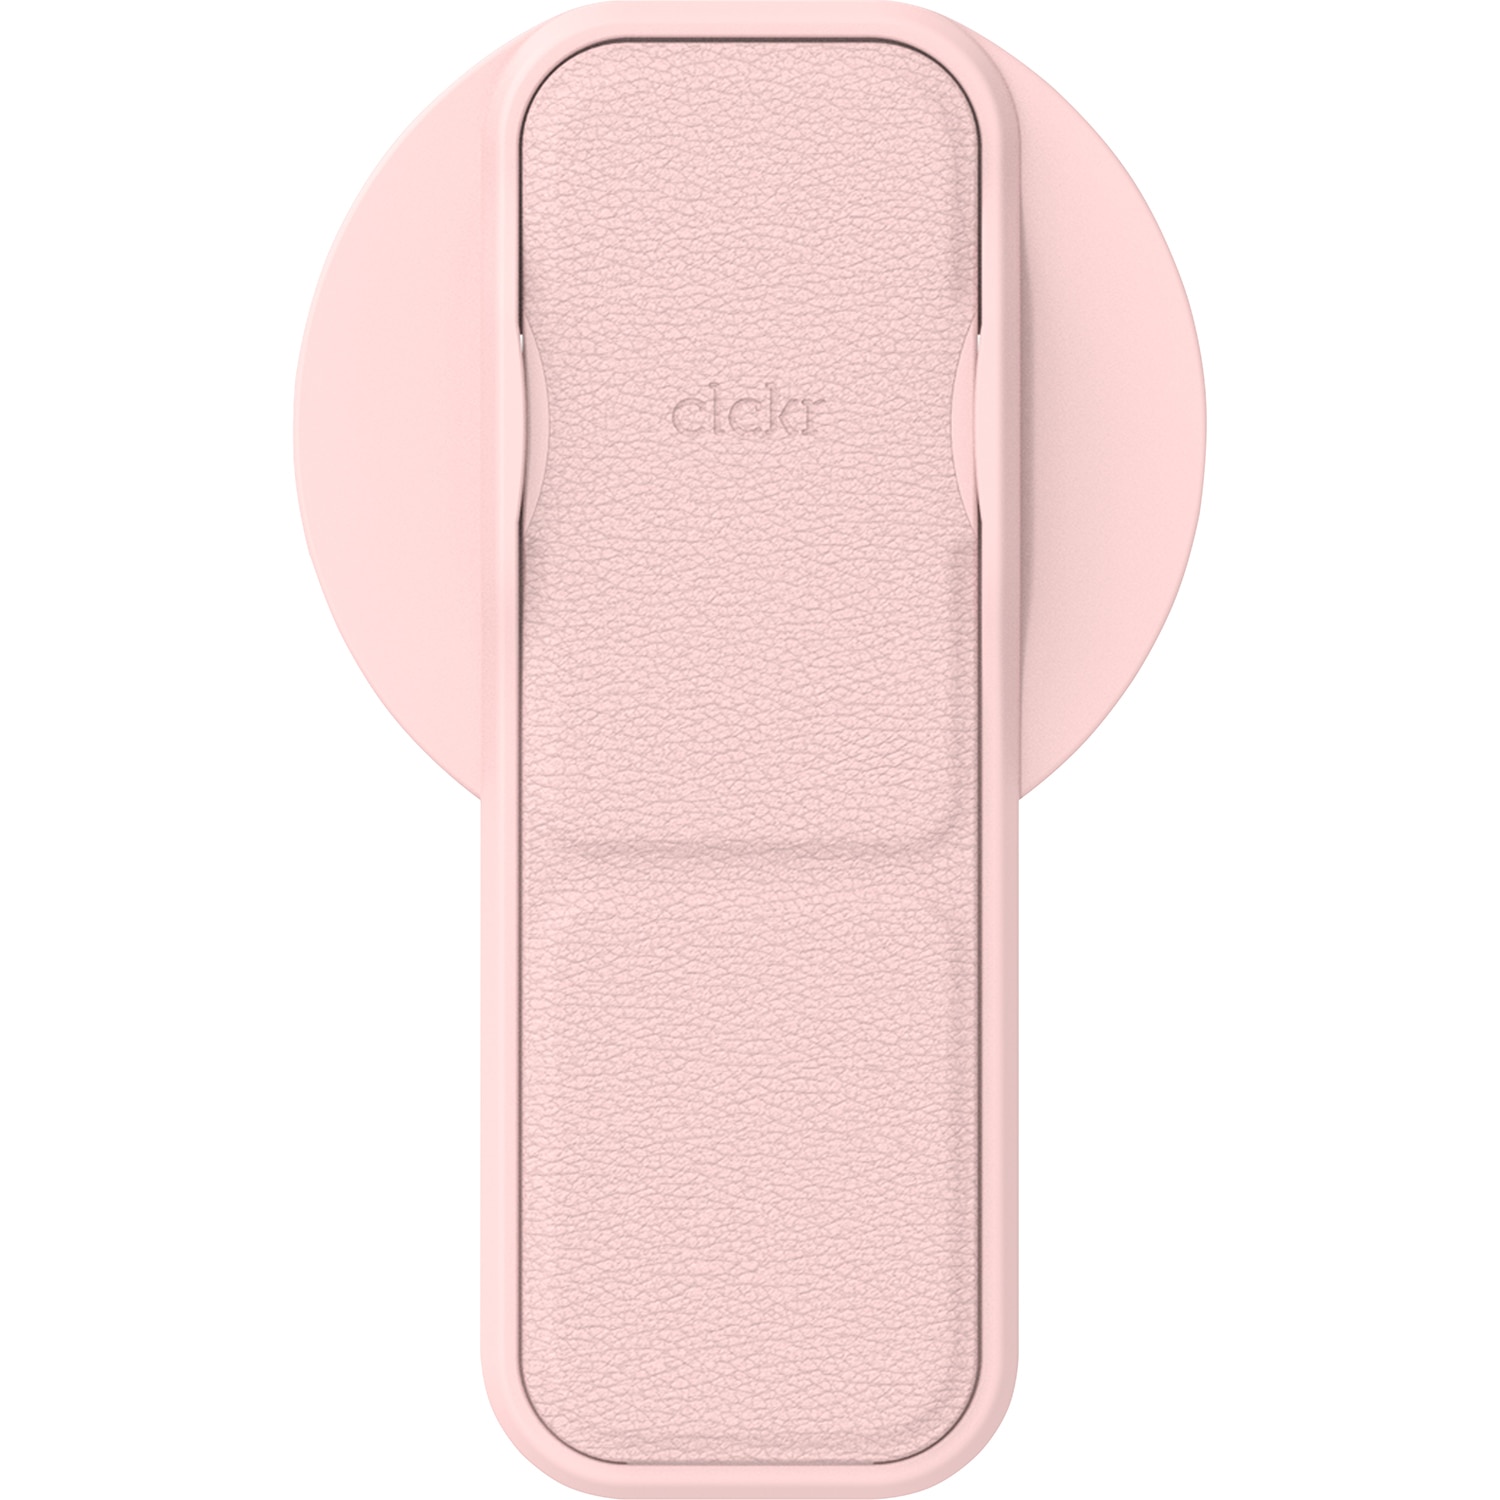 CLCKR Compact MagSafe Stand and Grip- Pink